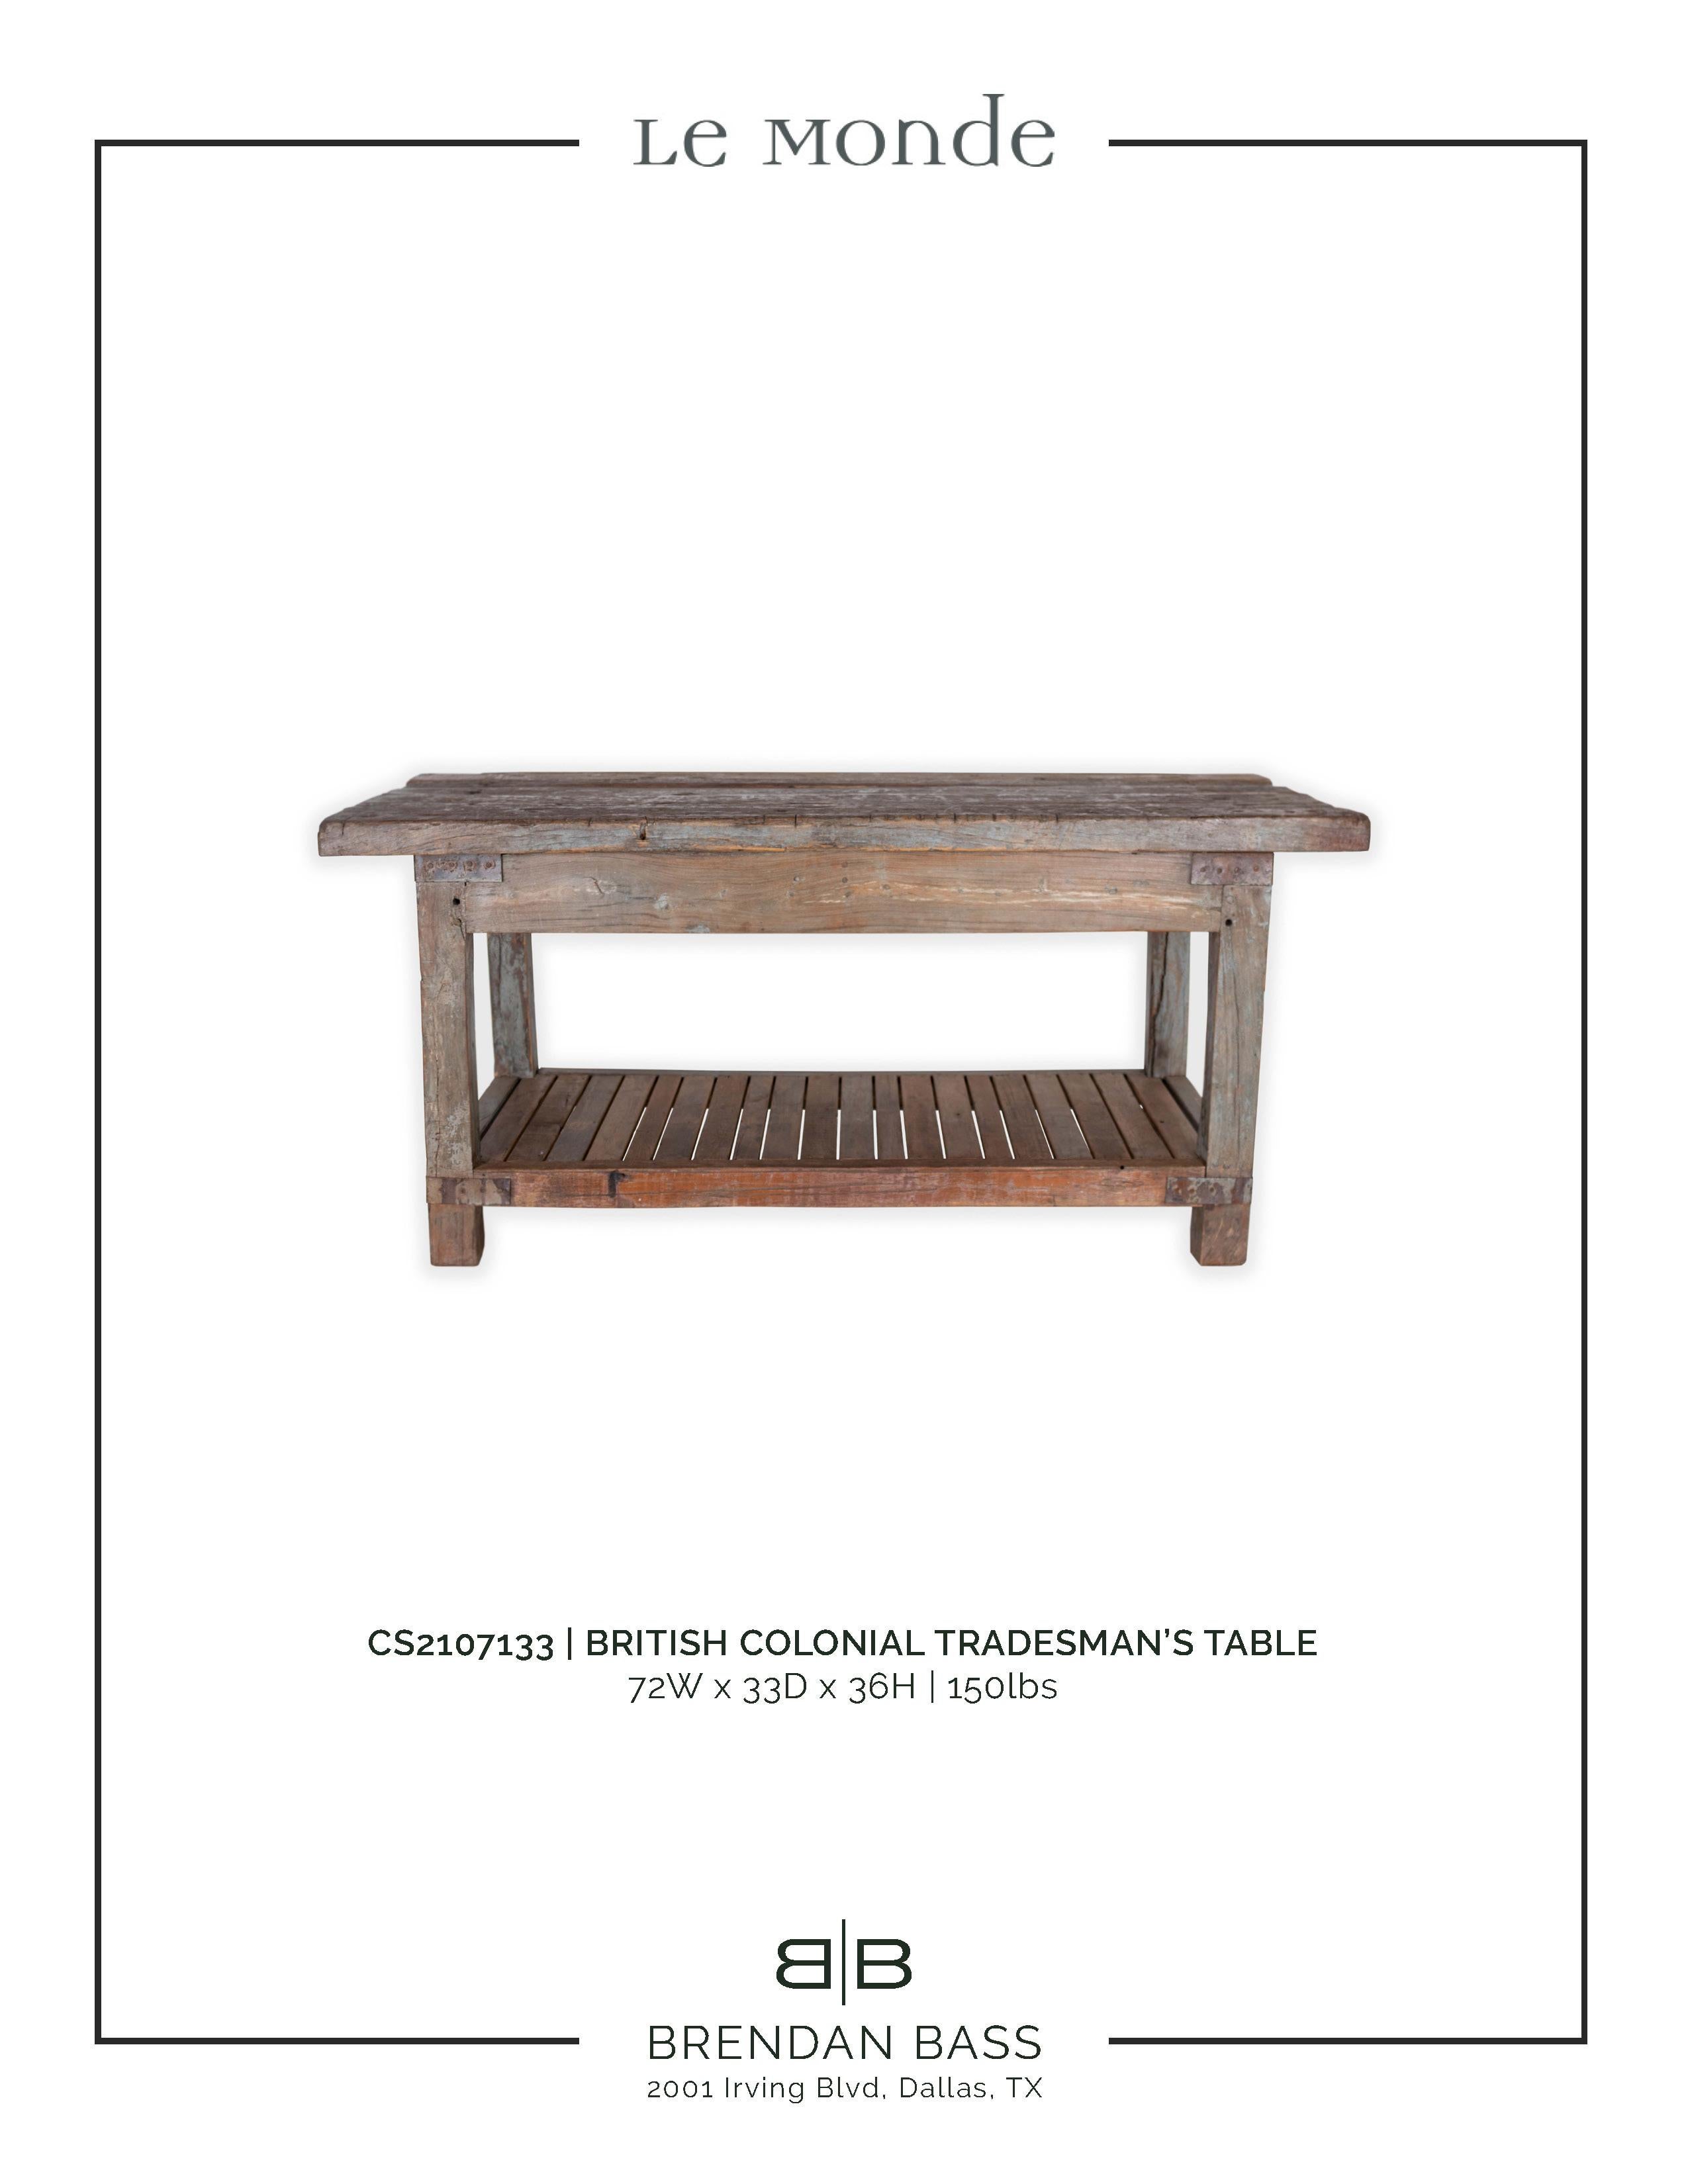 Colonial tradesman's console table. 

Piece from our one of a kind line, Le Monde. Exclusive to Brendan Bass.